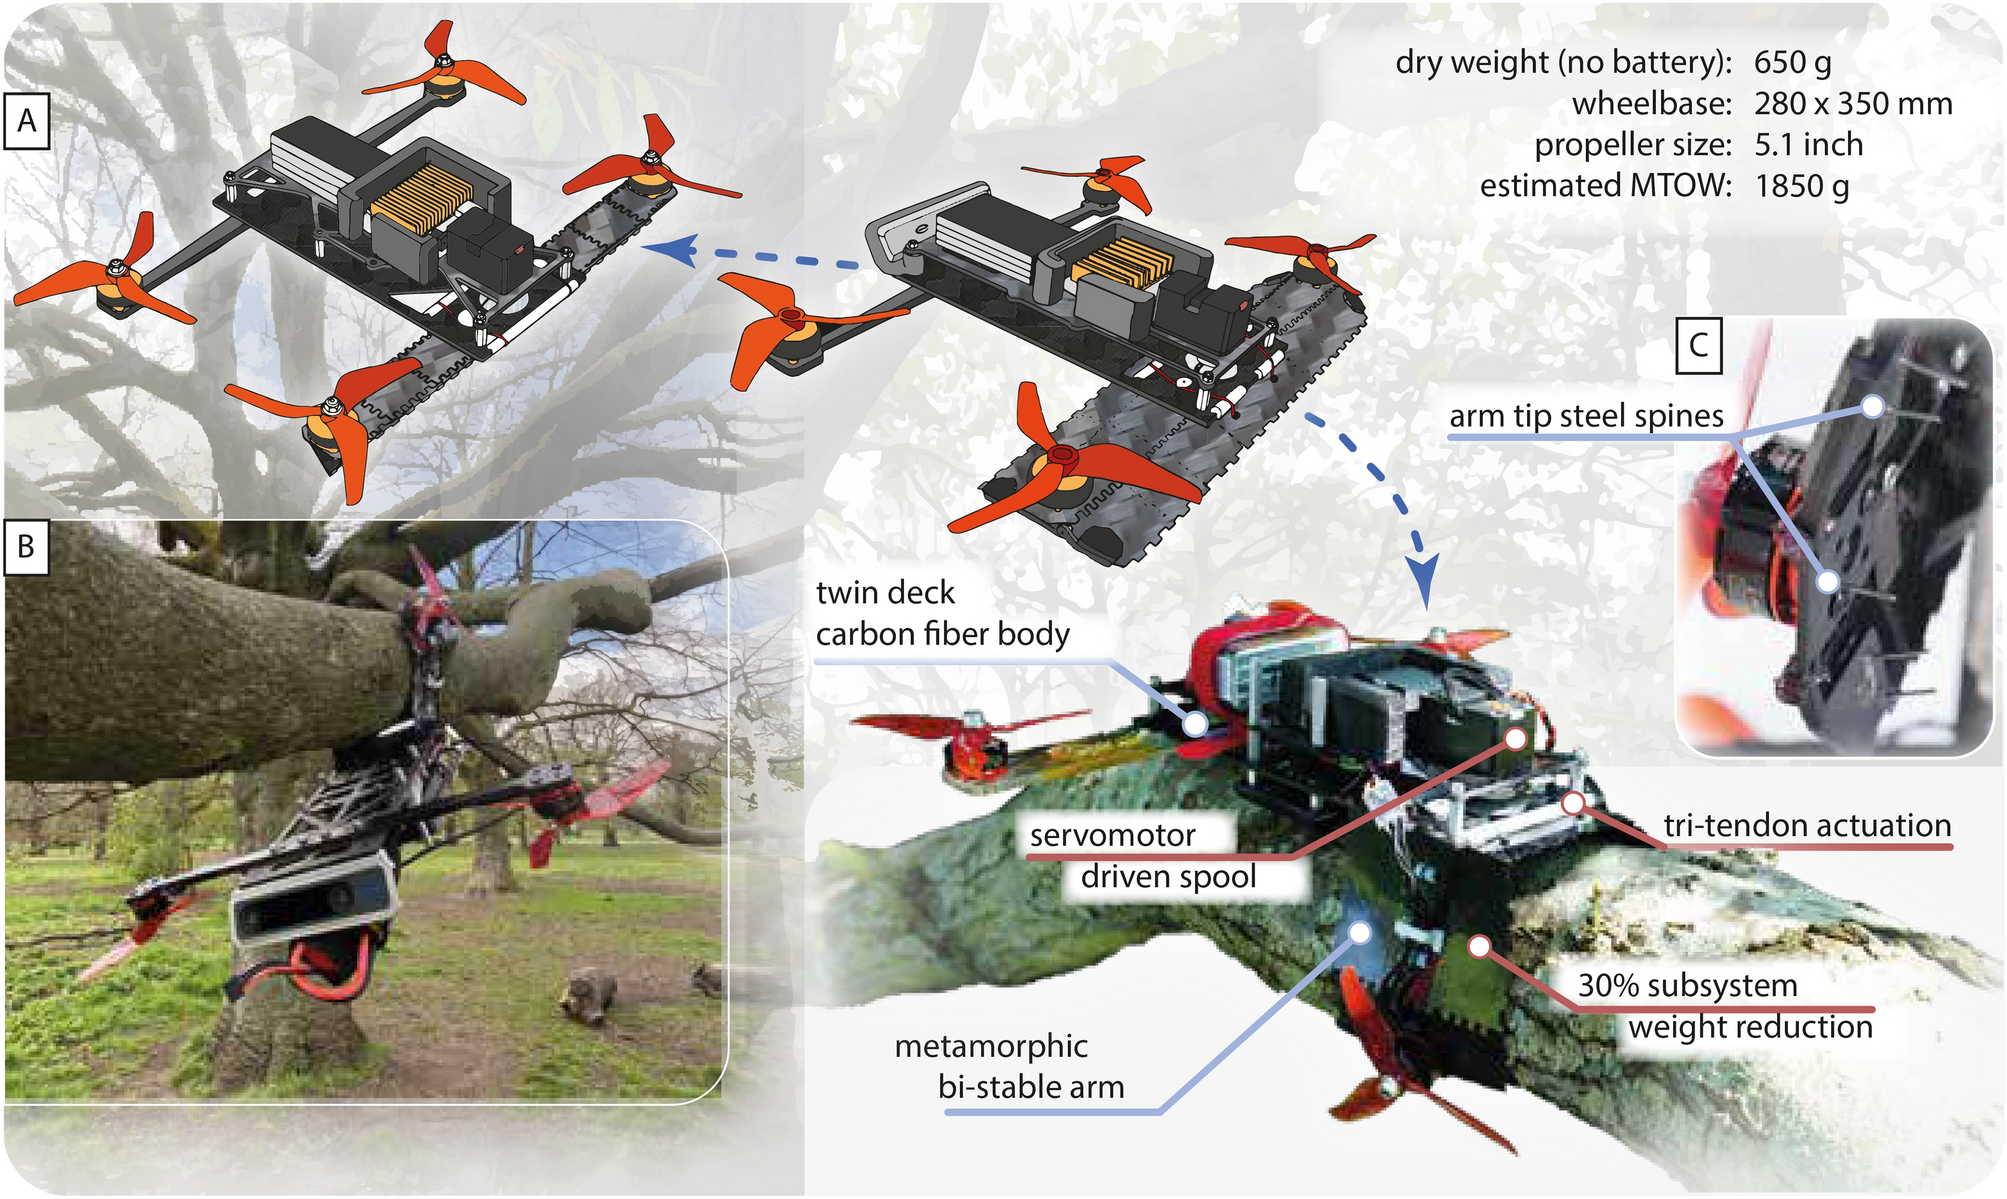 Metamorphic aerial robot capable of mid-air shape morphing for rapid  perching | Scientific Reports